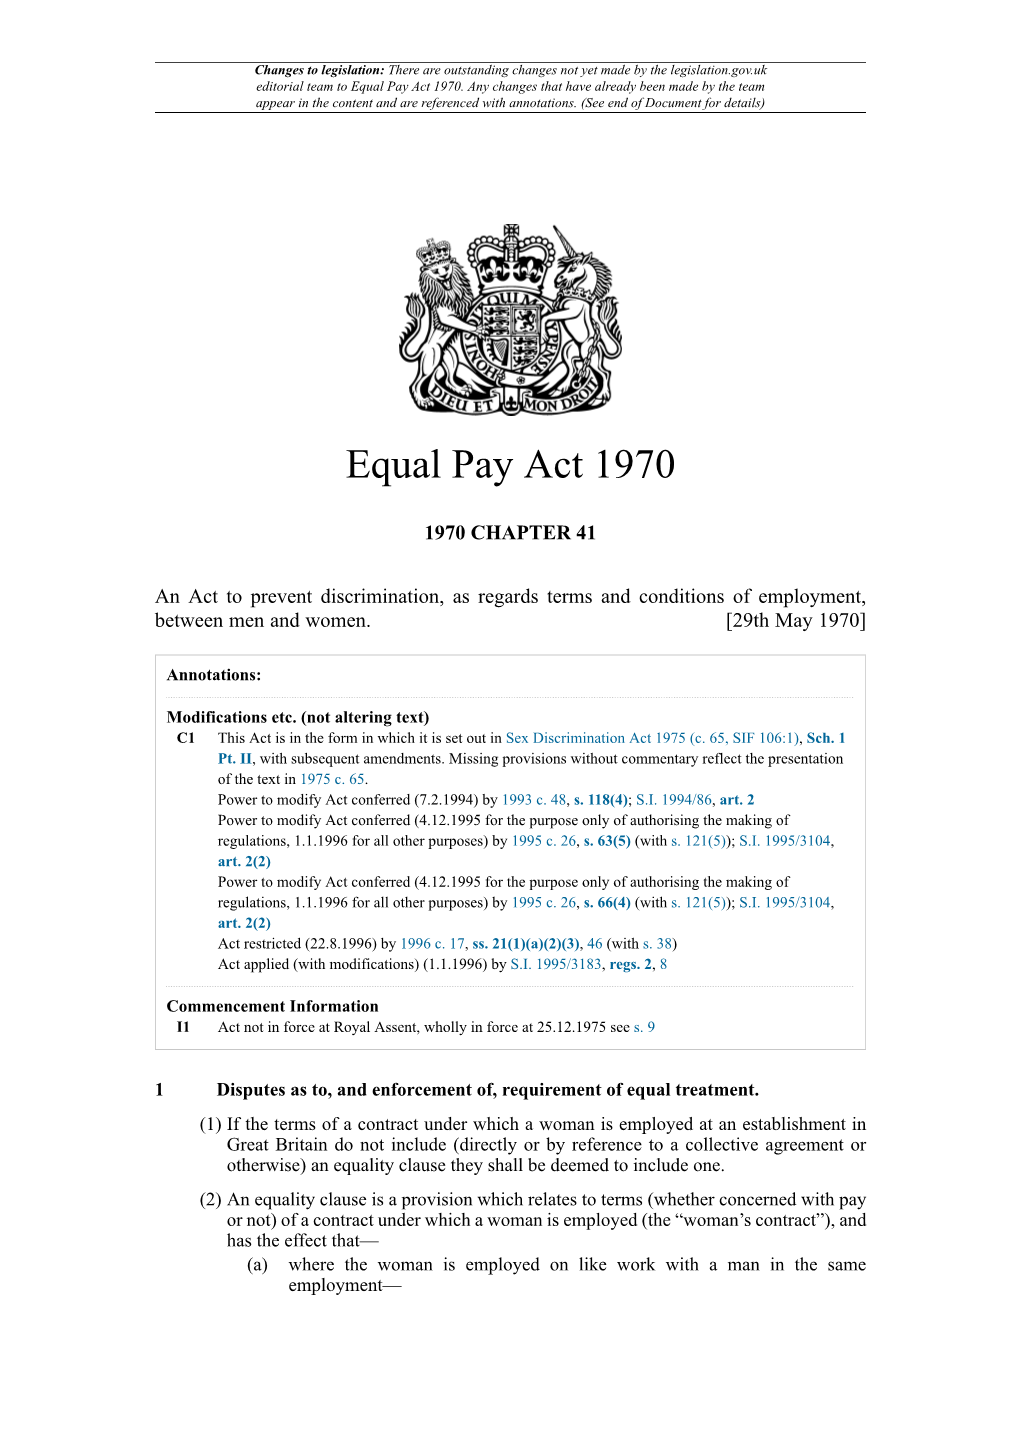 Equal Pay Act 1970